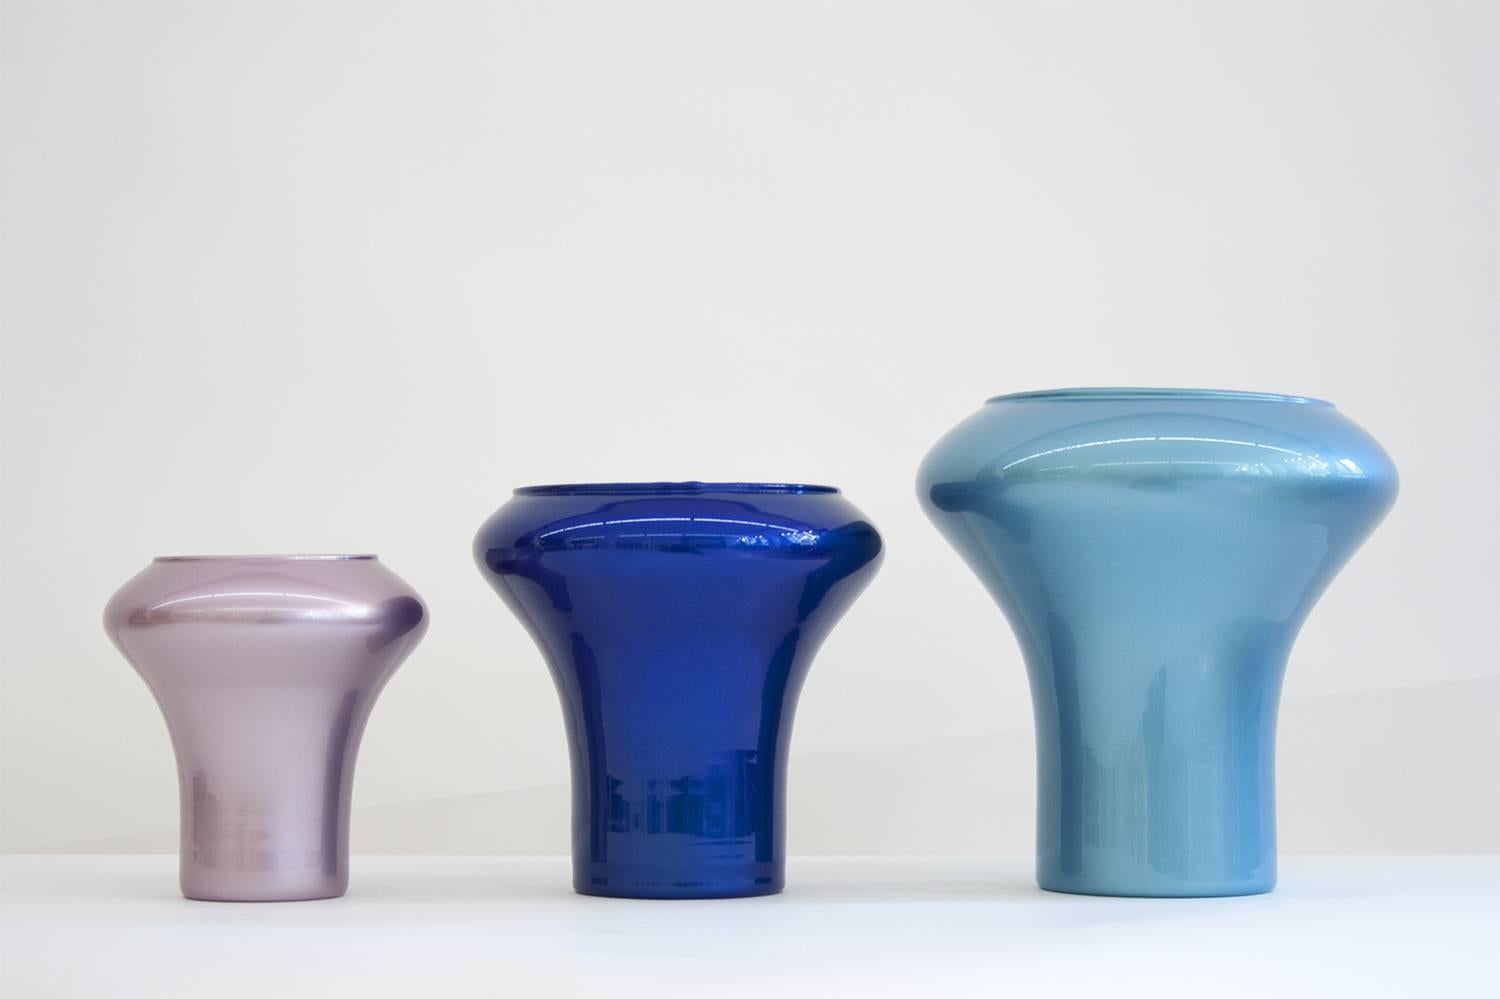 Ragaz
Set of three glass vases handblown and lacquered with car paint.
Each vase is lacquered bicolor and signed and numbered (of an edition of eight) by Philippe Cramer.

Small vase exterior pink/interior yellow.
Dimensions: Ø 16 cm x height 16 cm,